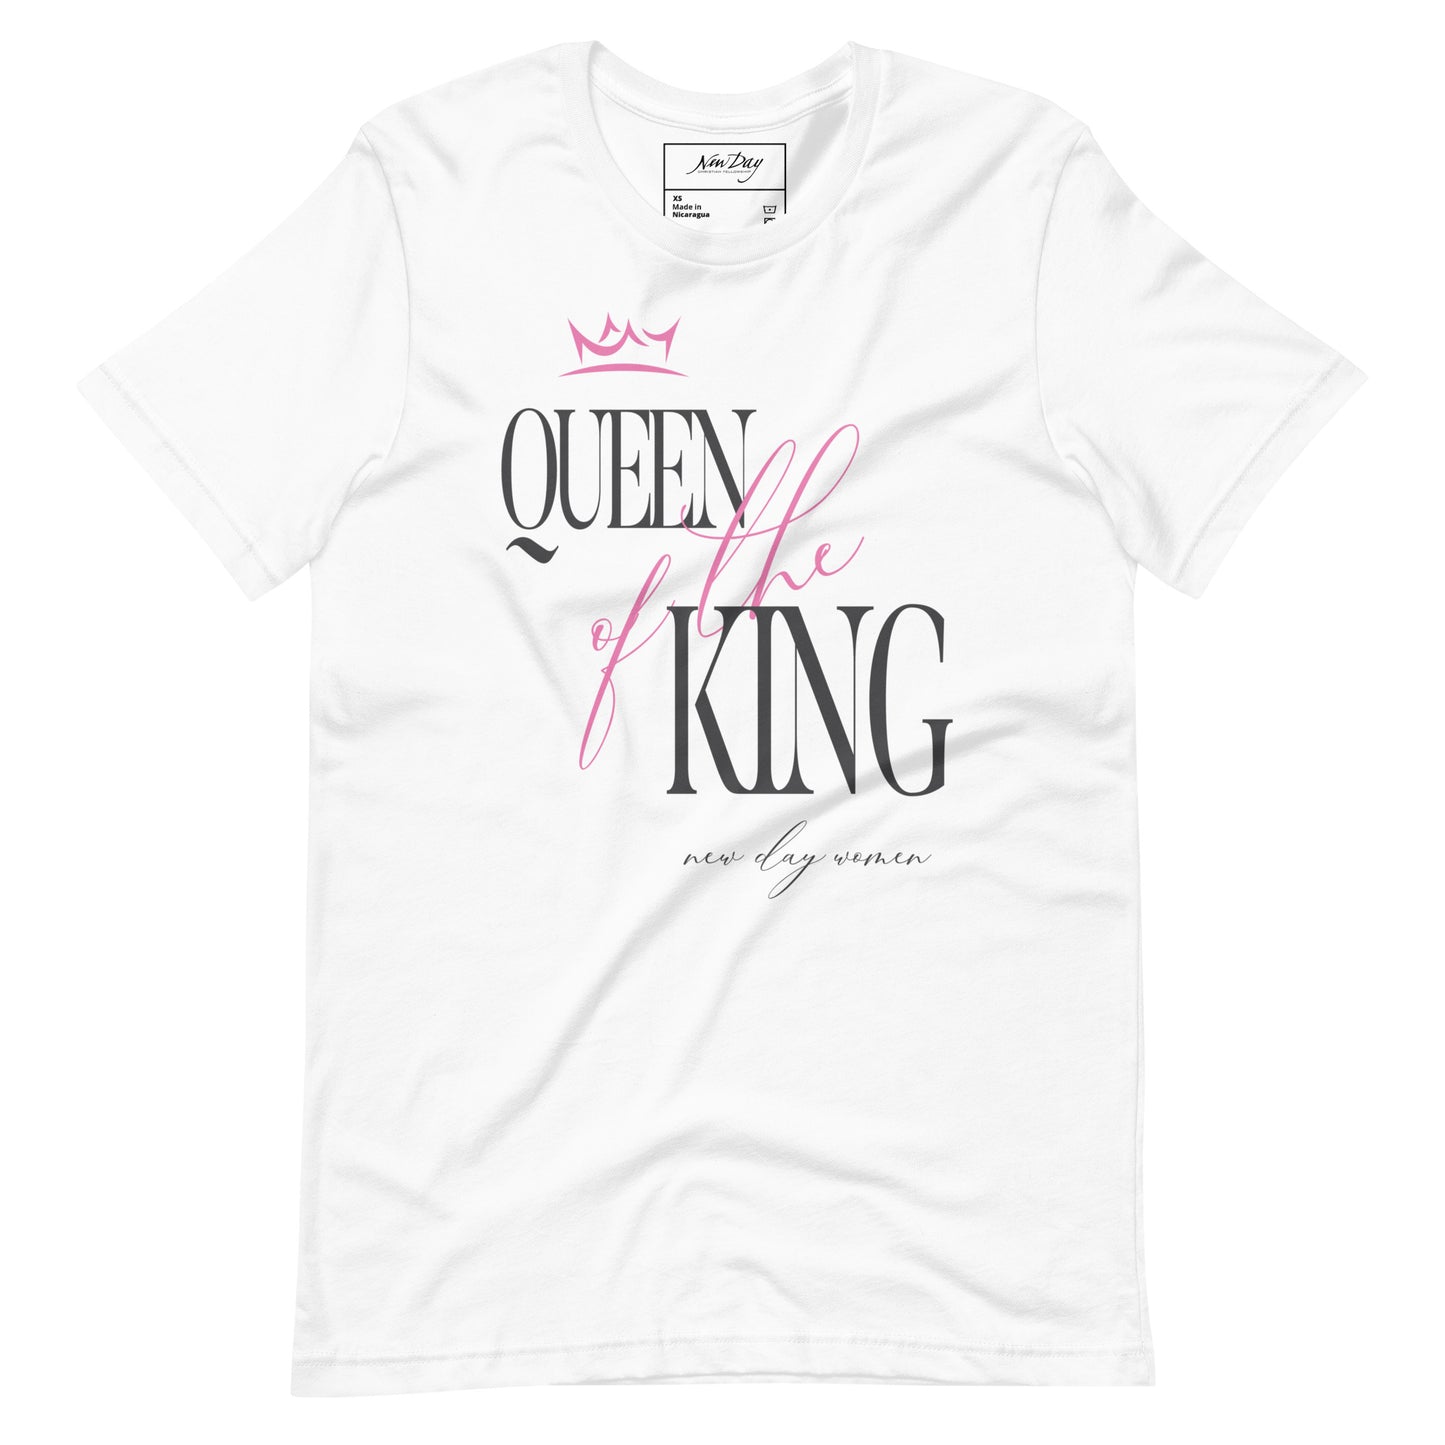 Queen of the King Shirt